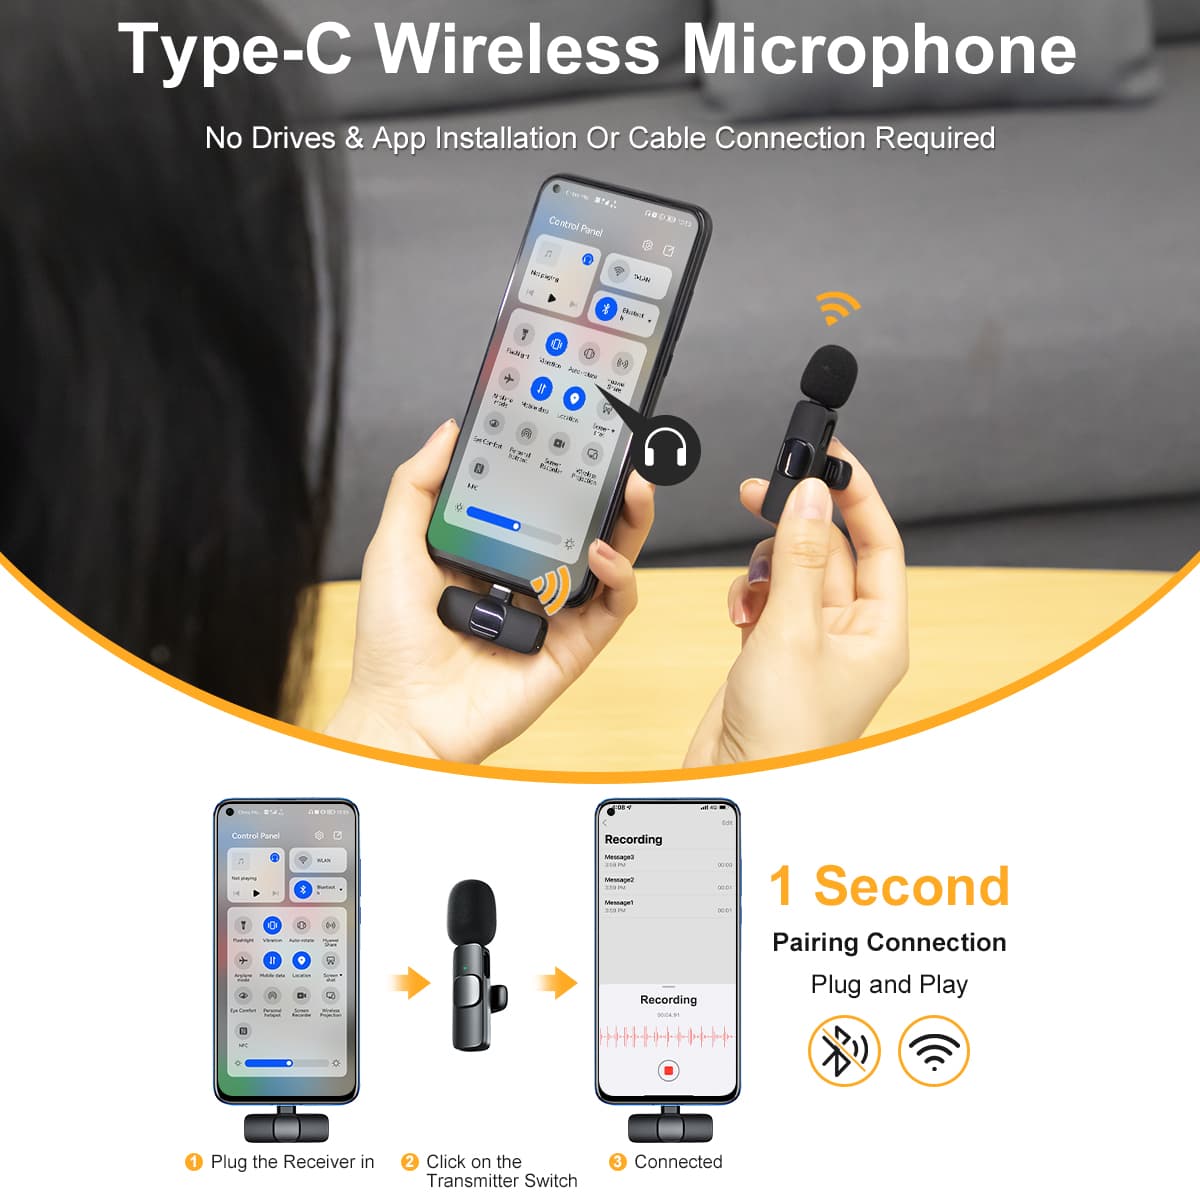 Moman CP1(C) android external microphone works with Type-C port, no app and cable required